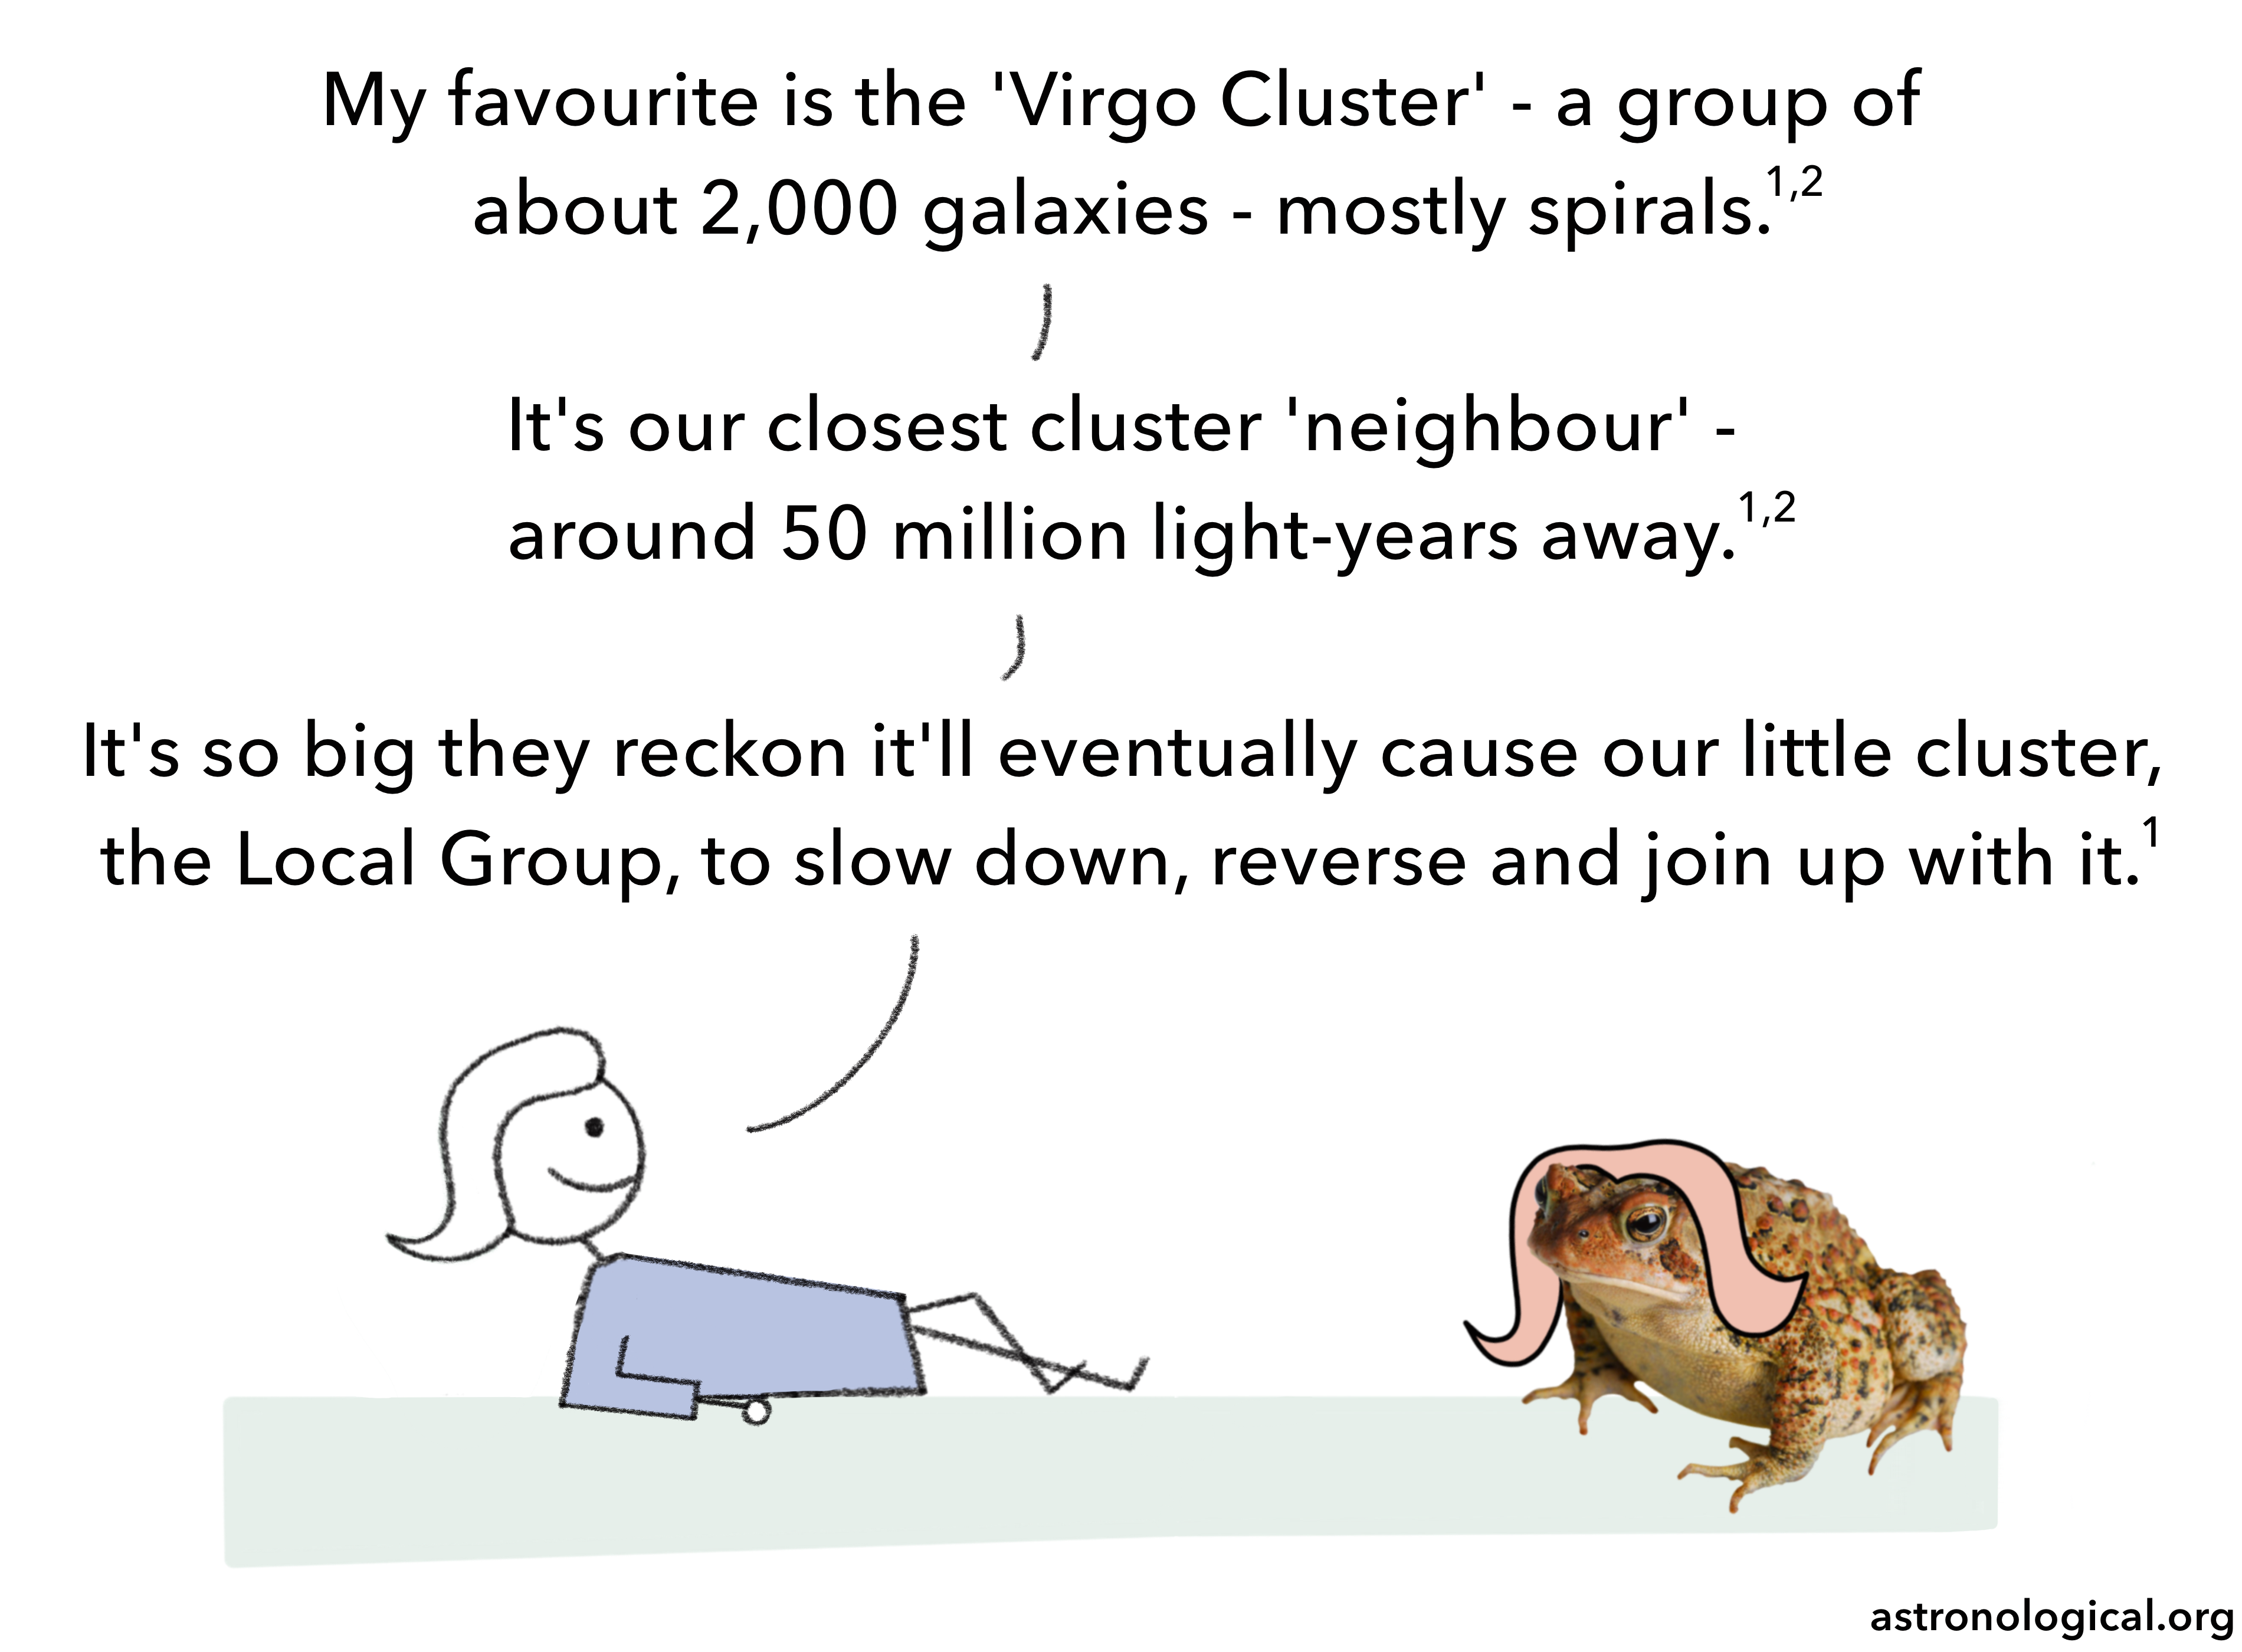 The girl continues: My favourite is the 'Virgo Cluster' - a group of about 2,000 galaxies - mostly spirals. It's our closest cluster 'neighbour' - around 50 million light-years away. It's so big they reckon it'll eventually cause our little cluster, the Local Group, to slow down, reverse and join up with it.